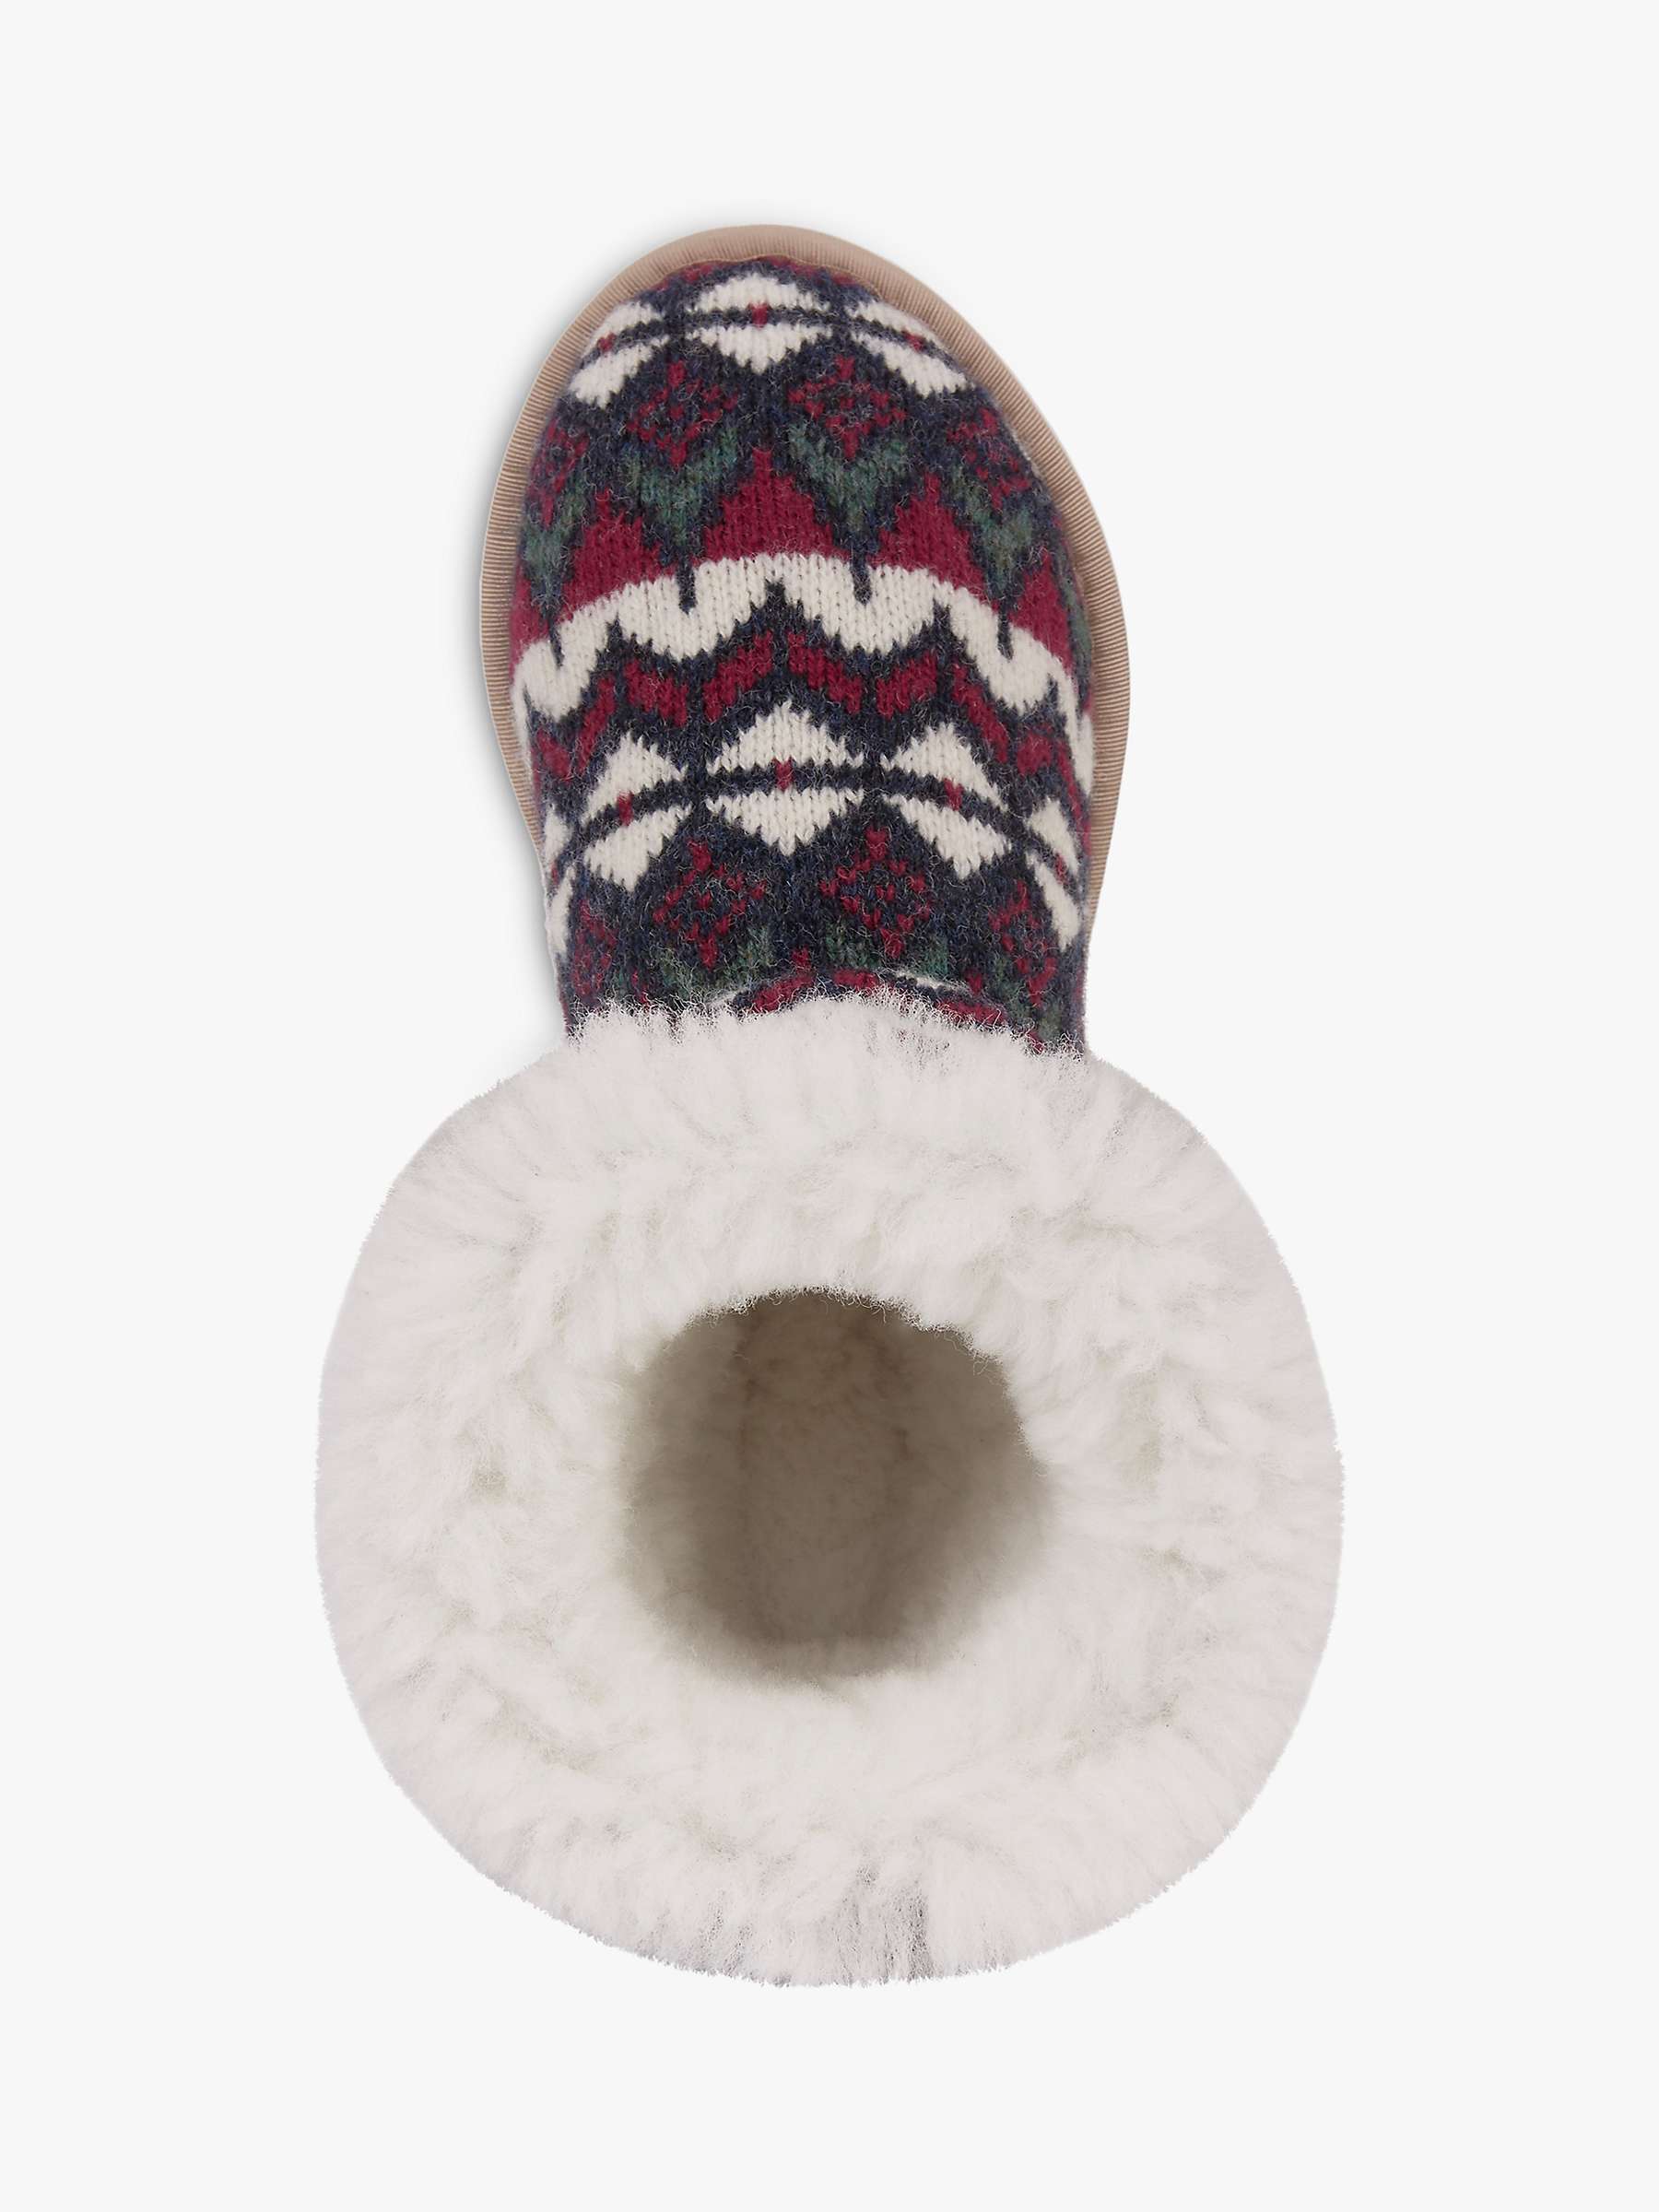 Buy Celtic & Co. Knitted Wool Shortie Slippers, Nordic Online at johnlewis.com